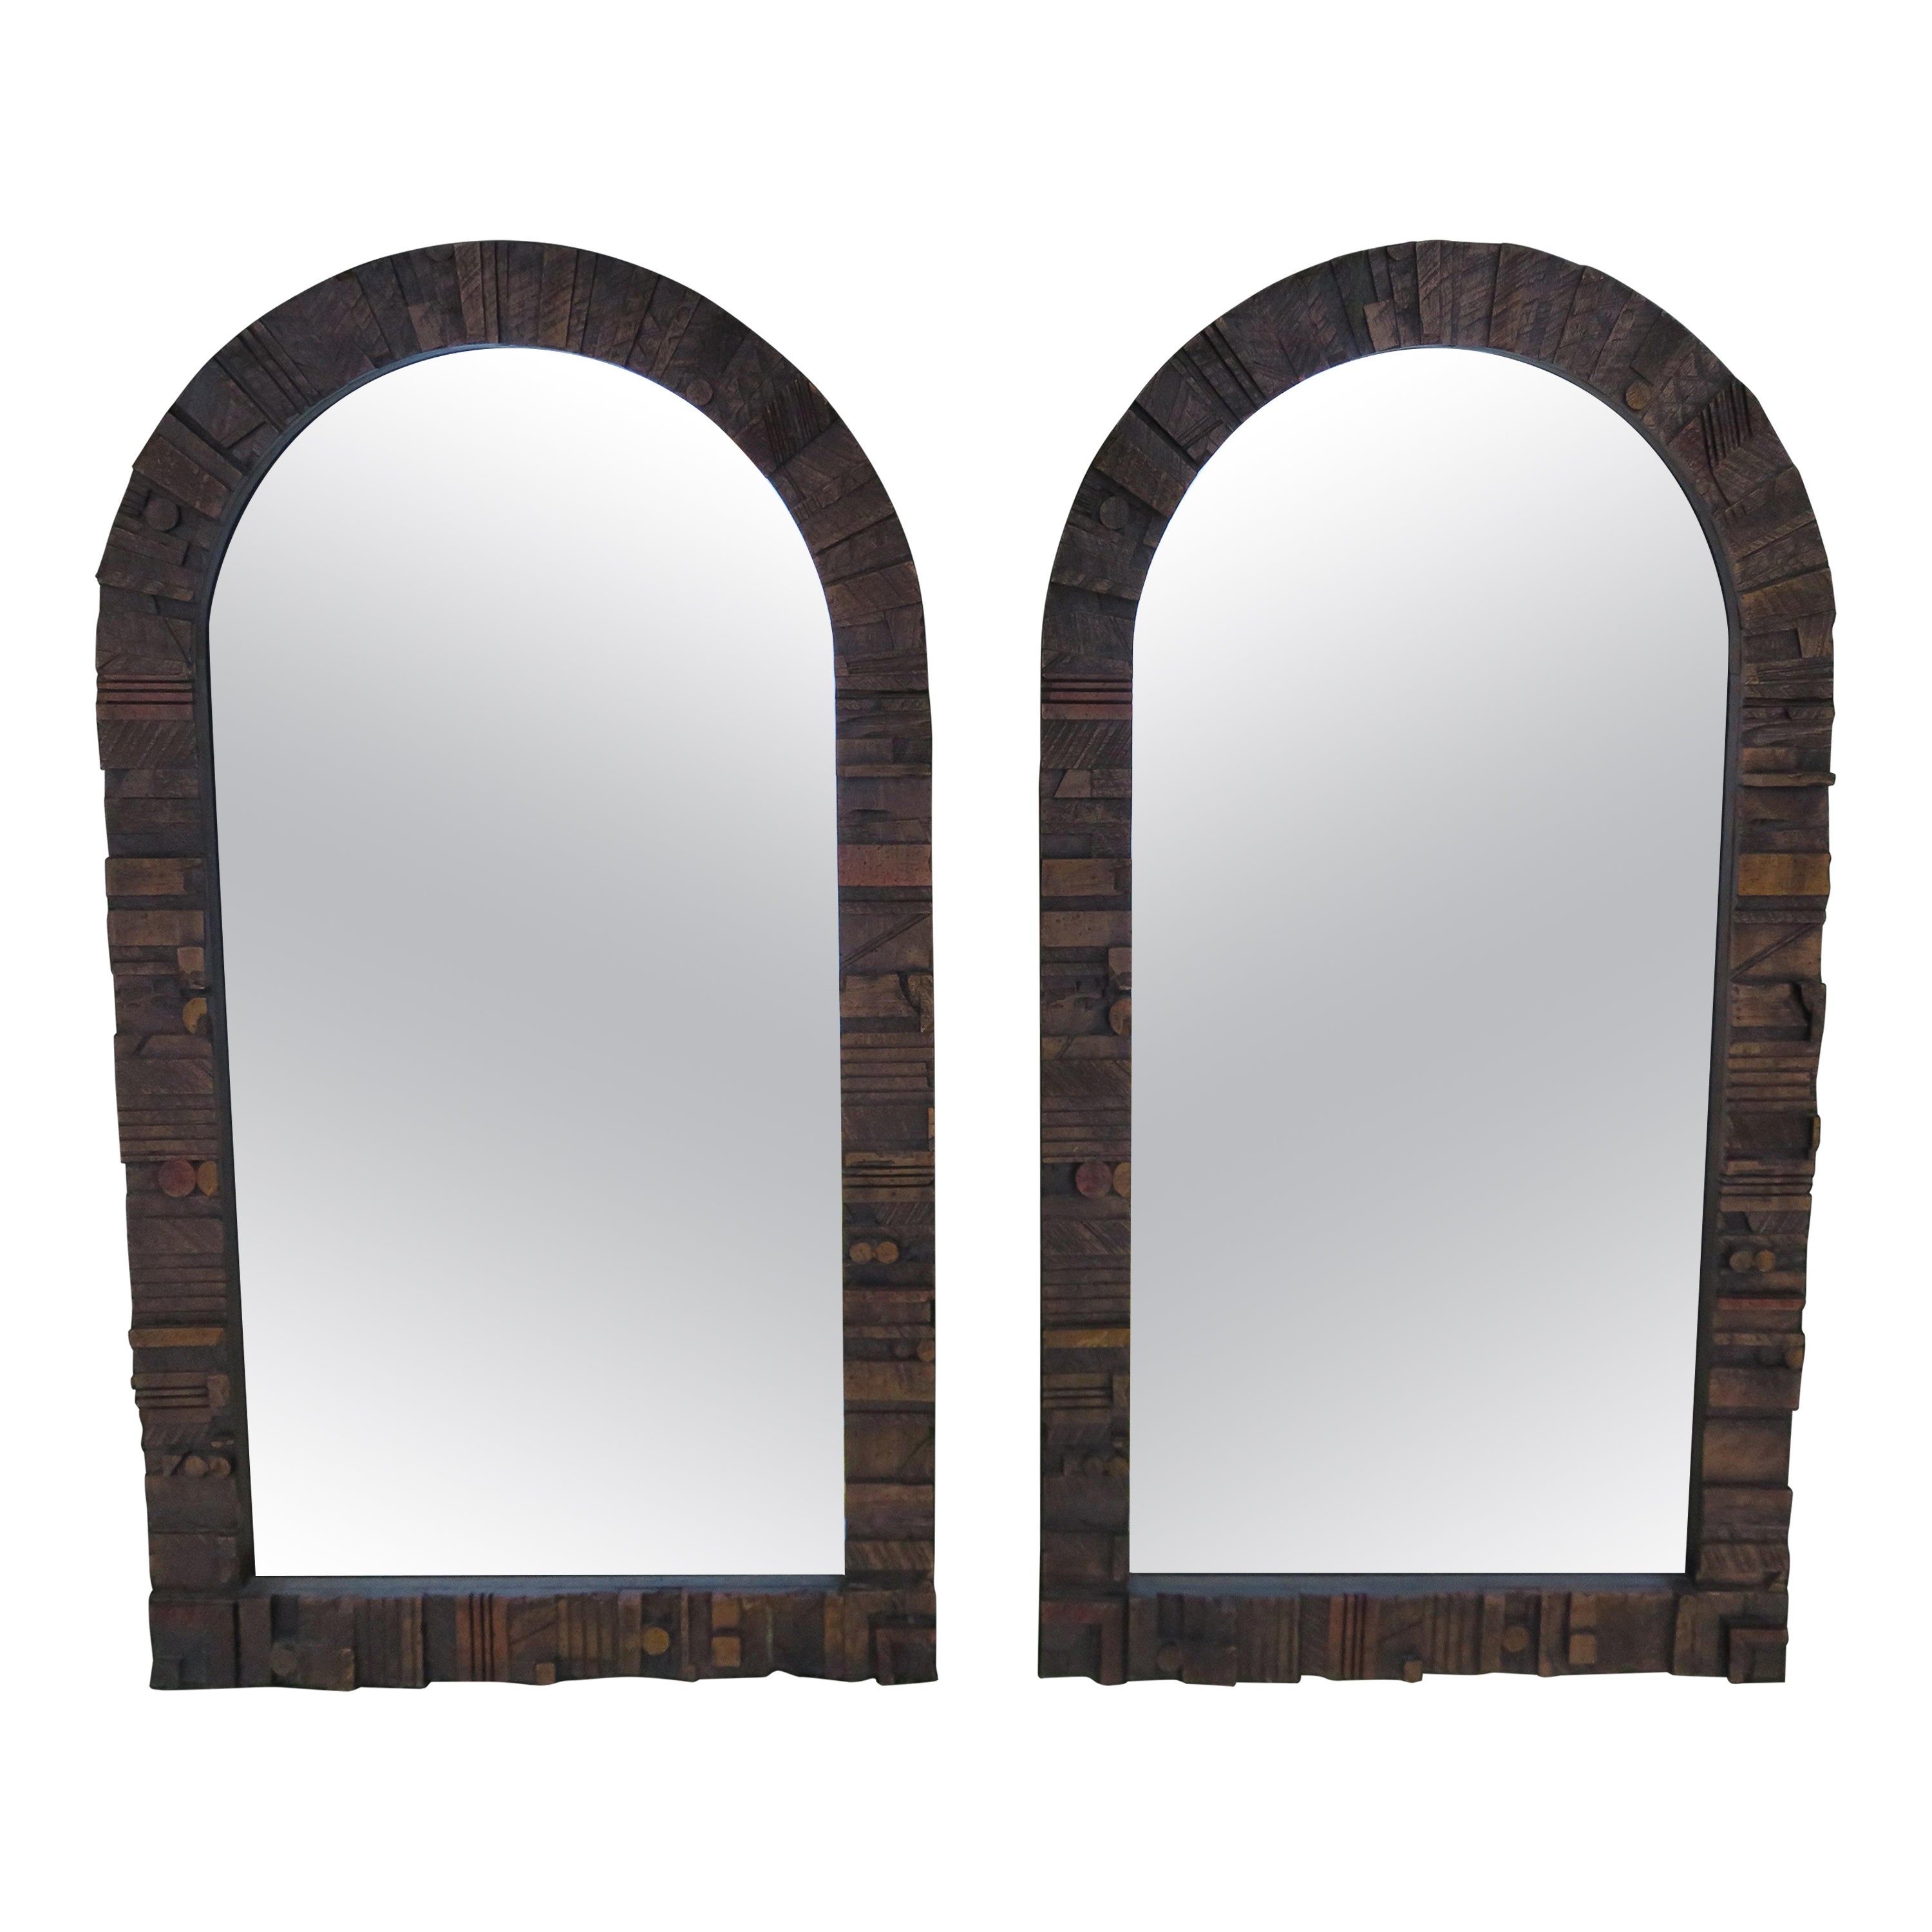 Fabulous Pair of Brutalist Arched Pueblo by Lane Mirrors Mid-Century Modern